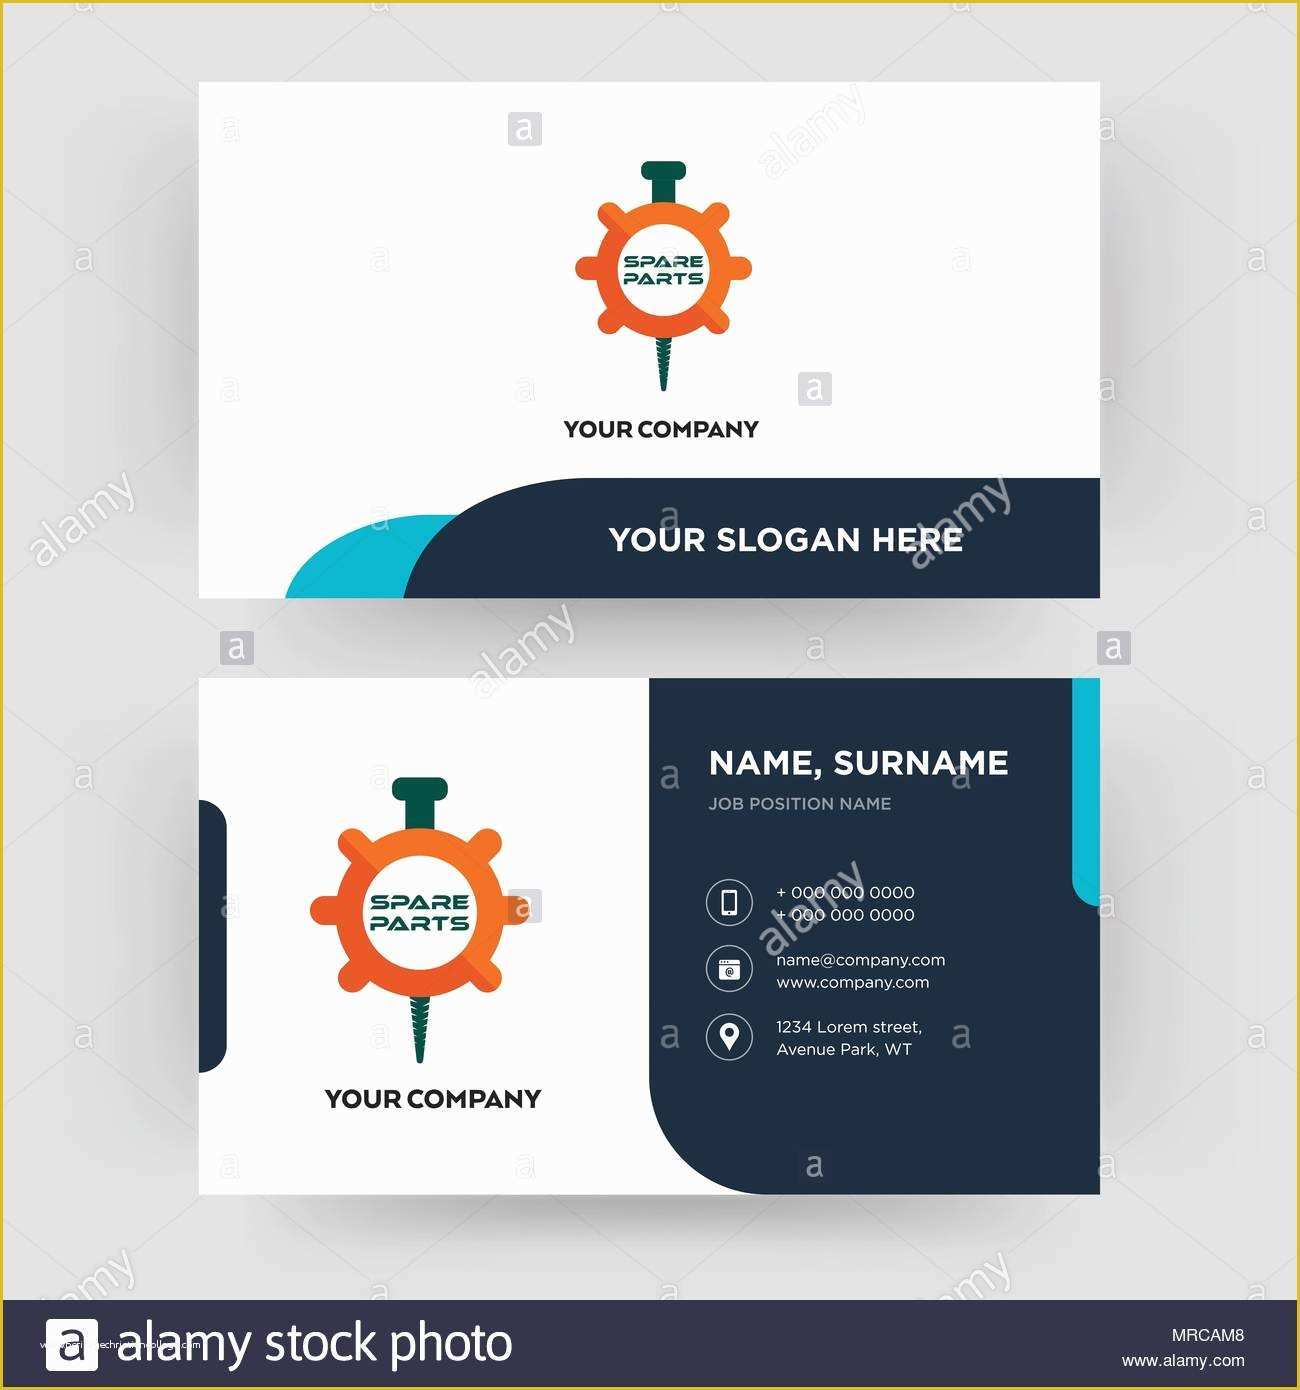 Auto Spare Parts Website Template Free Download Of Spare Parts Business Card Design Template Visiting for